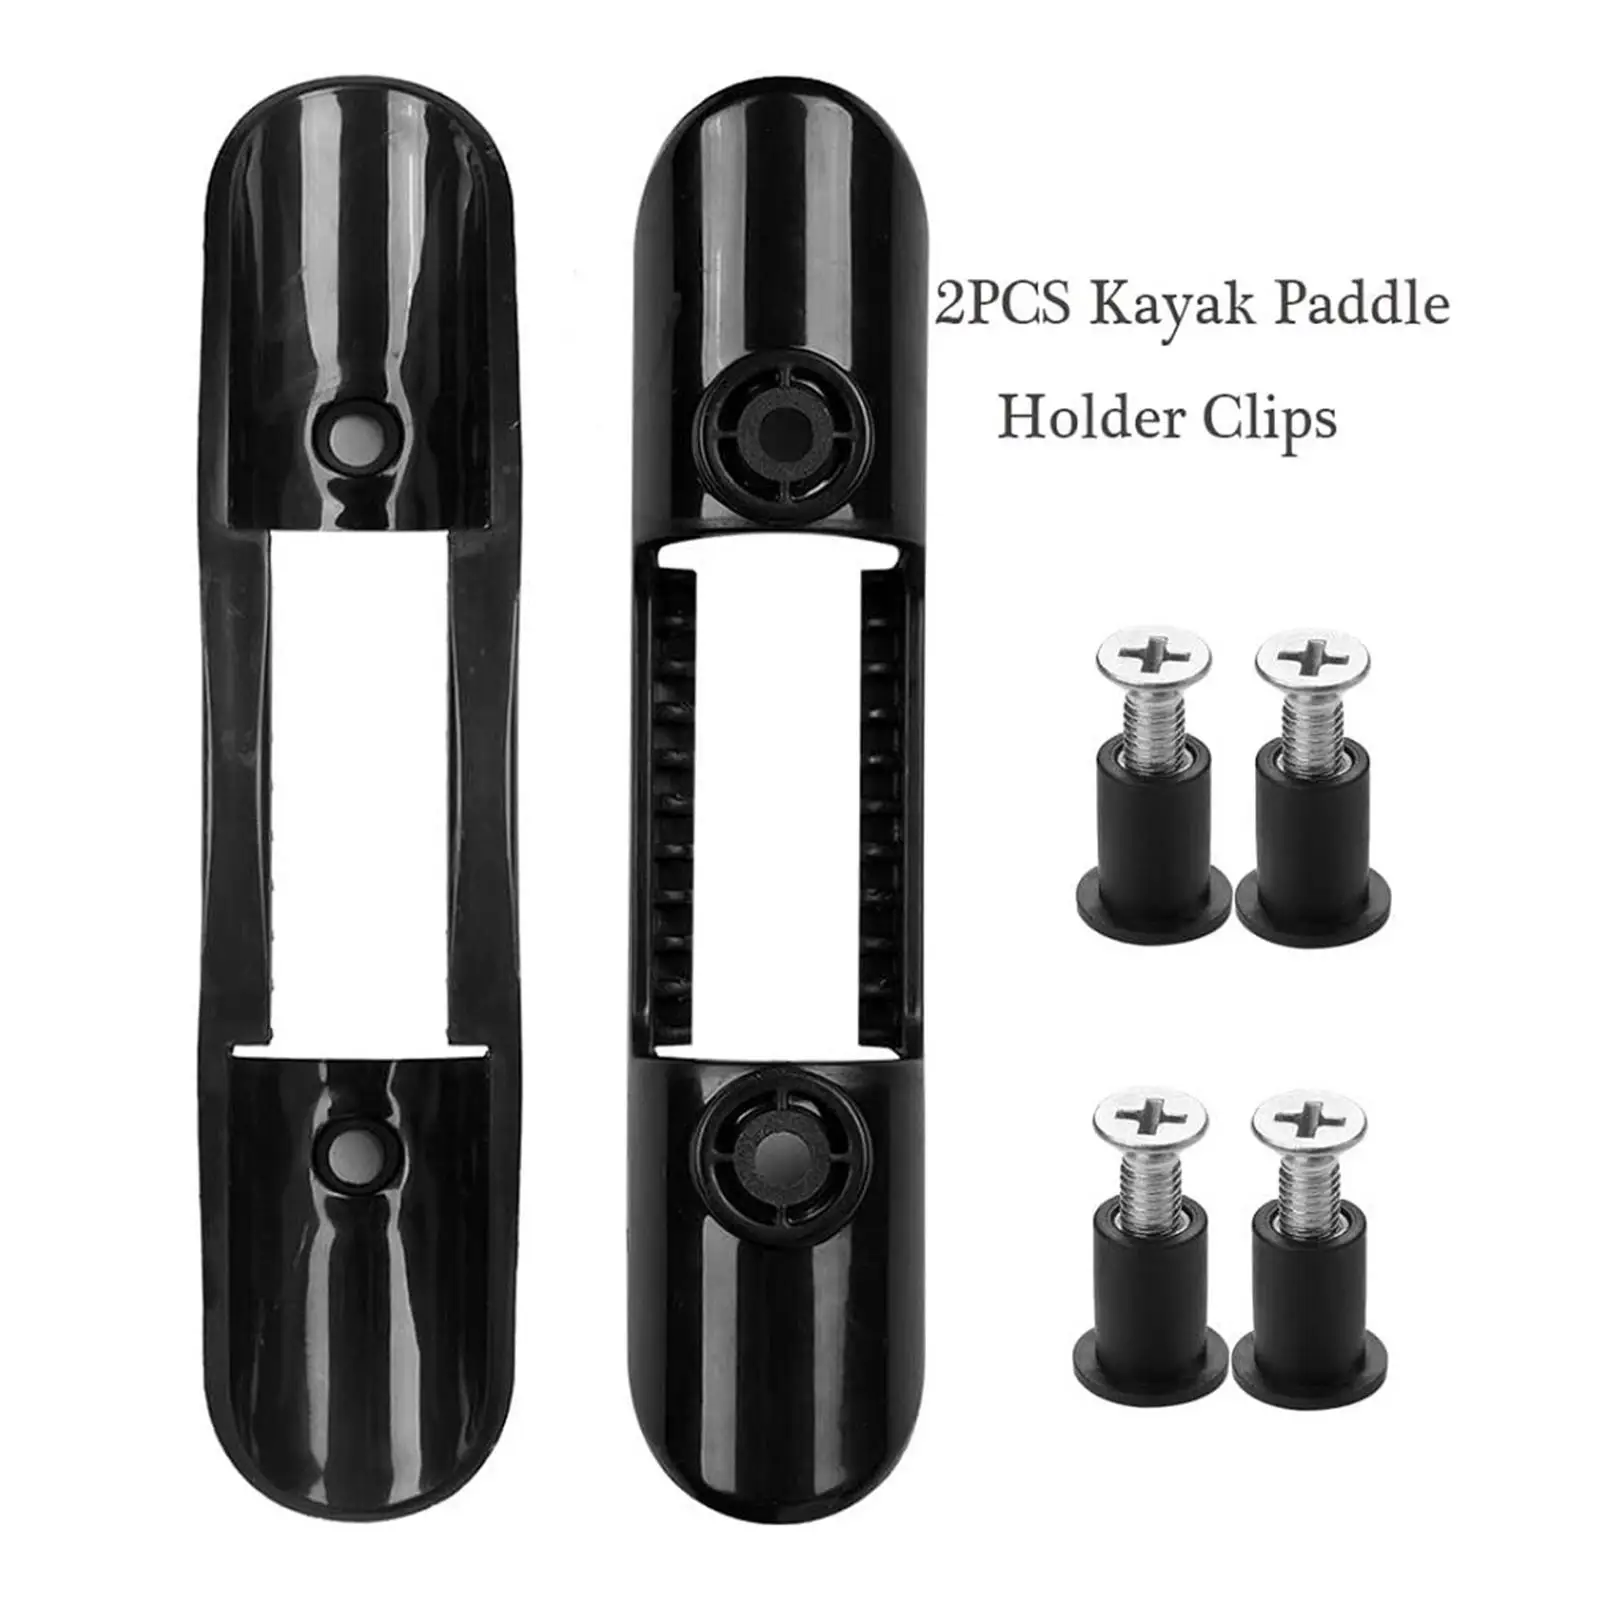 2Pcs Kayak Paddle Holder Clips Deck Mounted Kayak Pad Eyes Kayak Accessories Inflatable Boat Paddle Clips for Canoeing Rafting